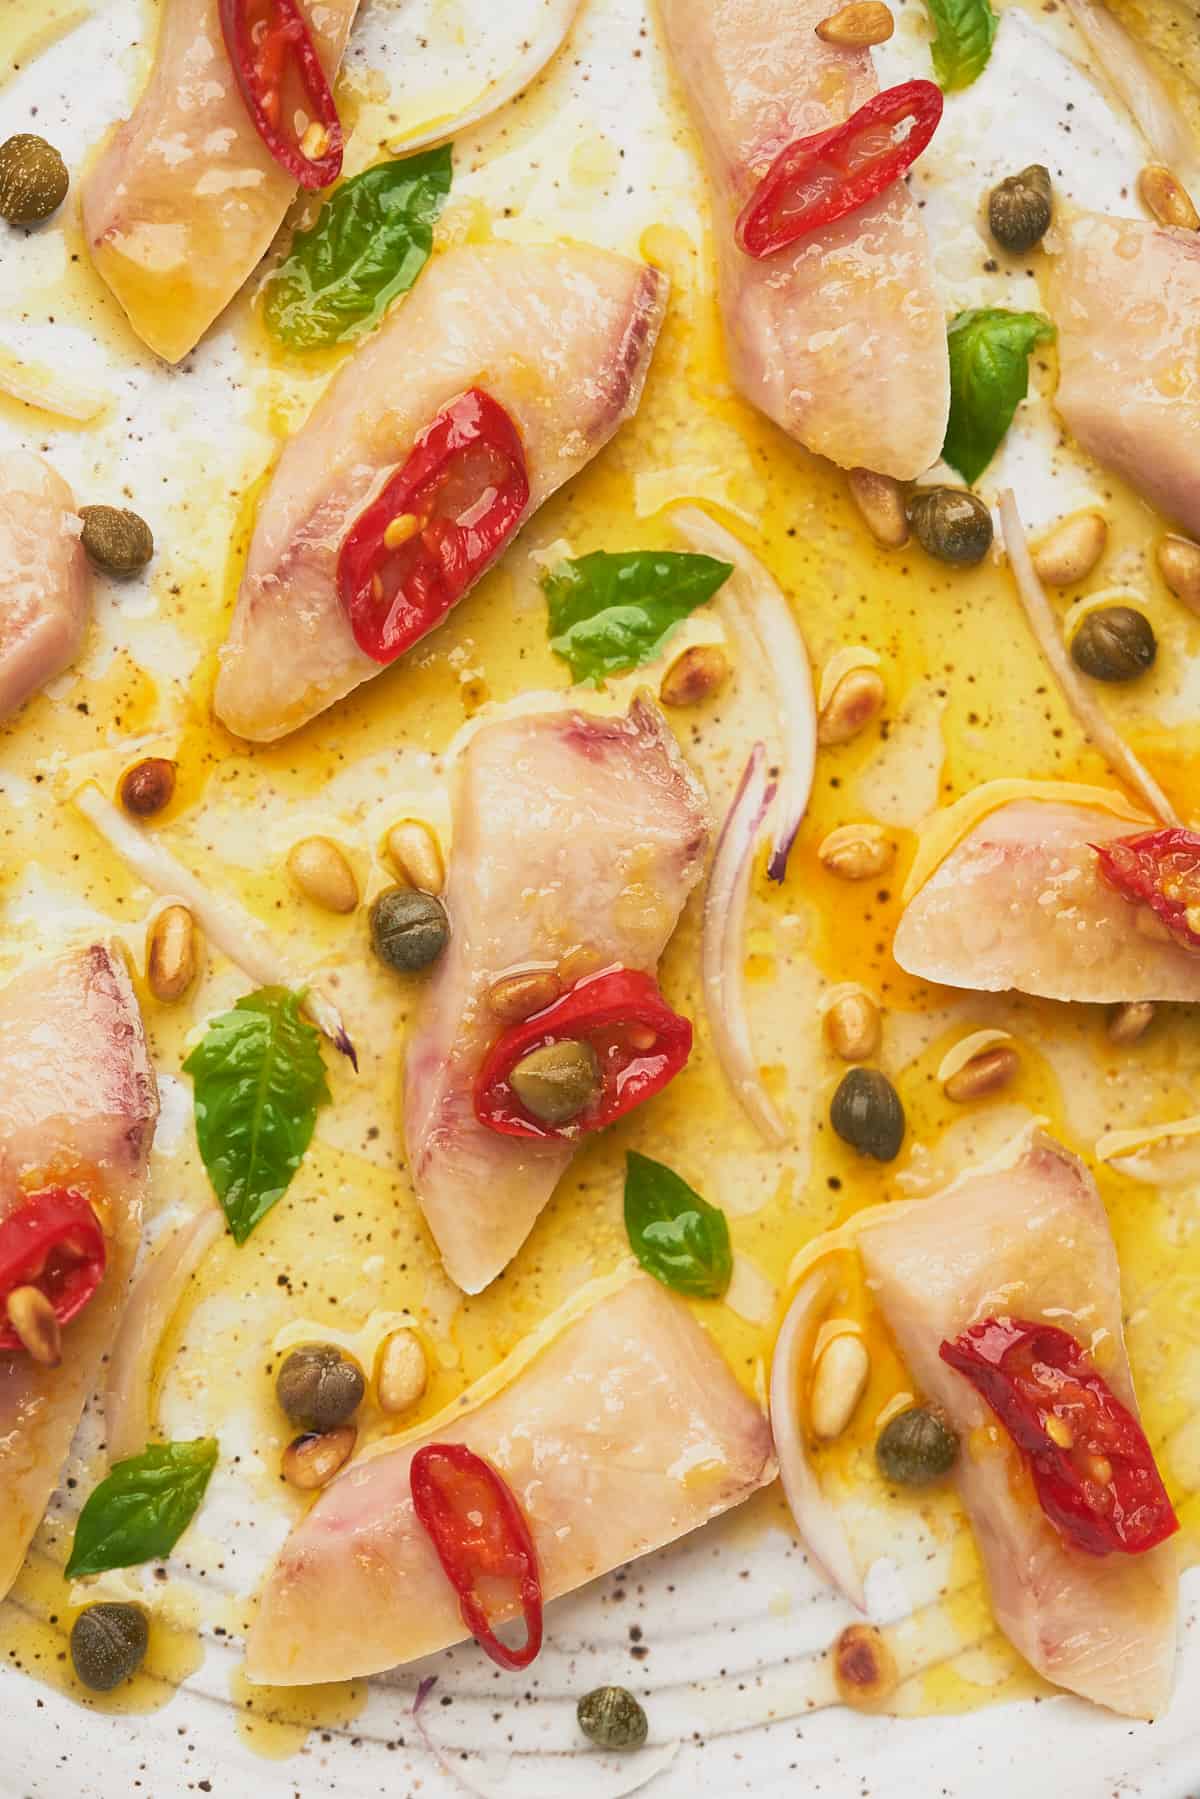 close up shot of thin slices of raw hamachi with lemon juice, olive oil, chiilis, and basil on a ceramic speckled plate.